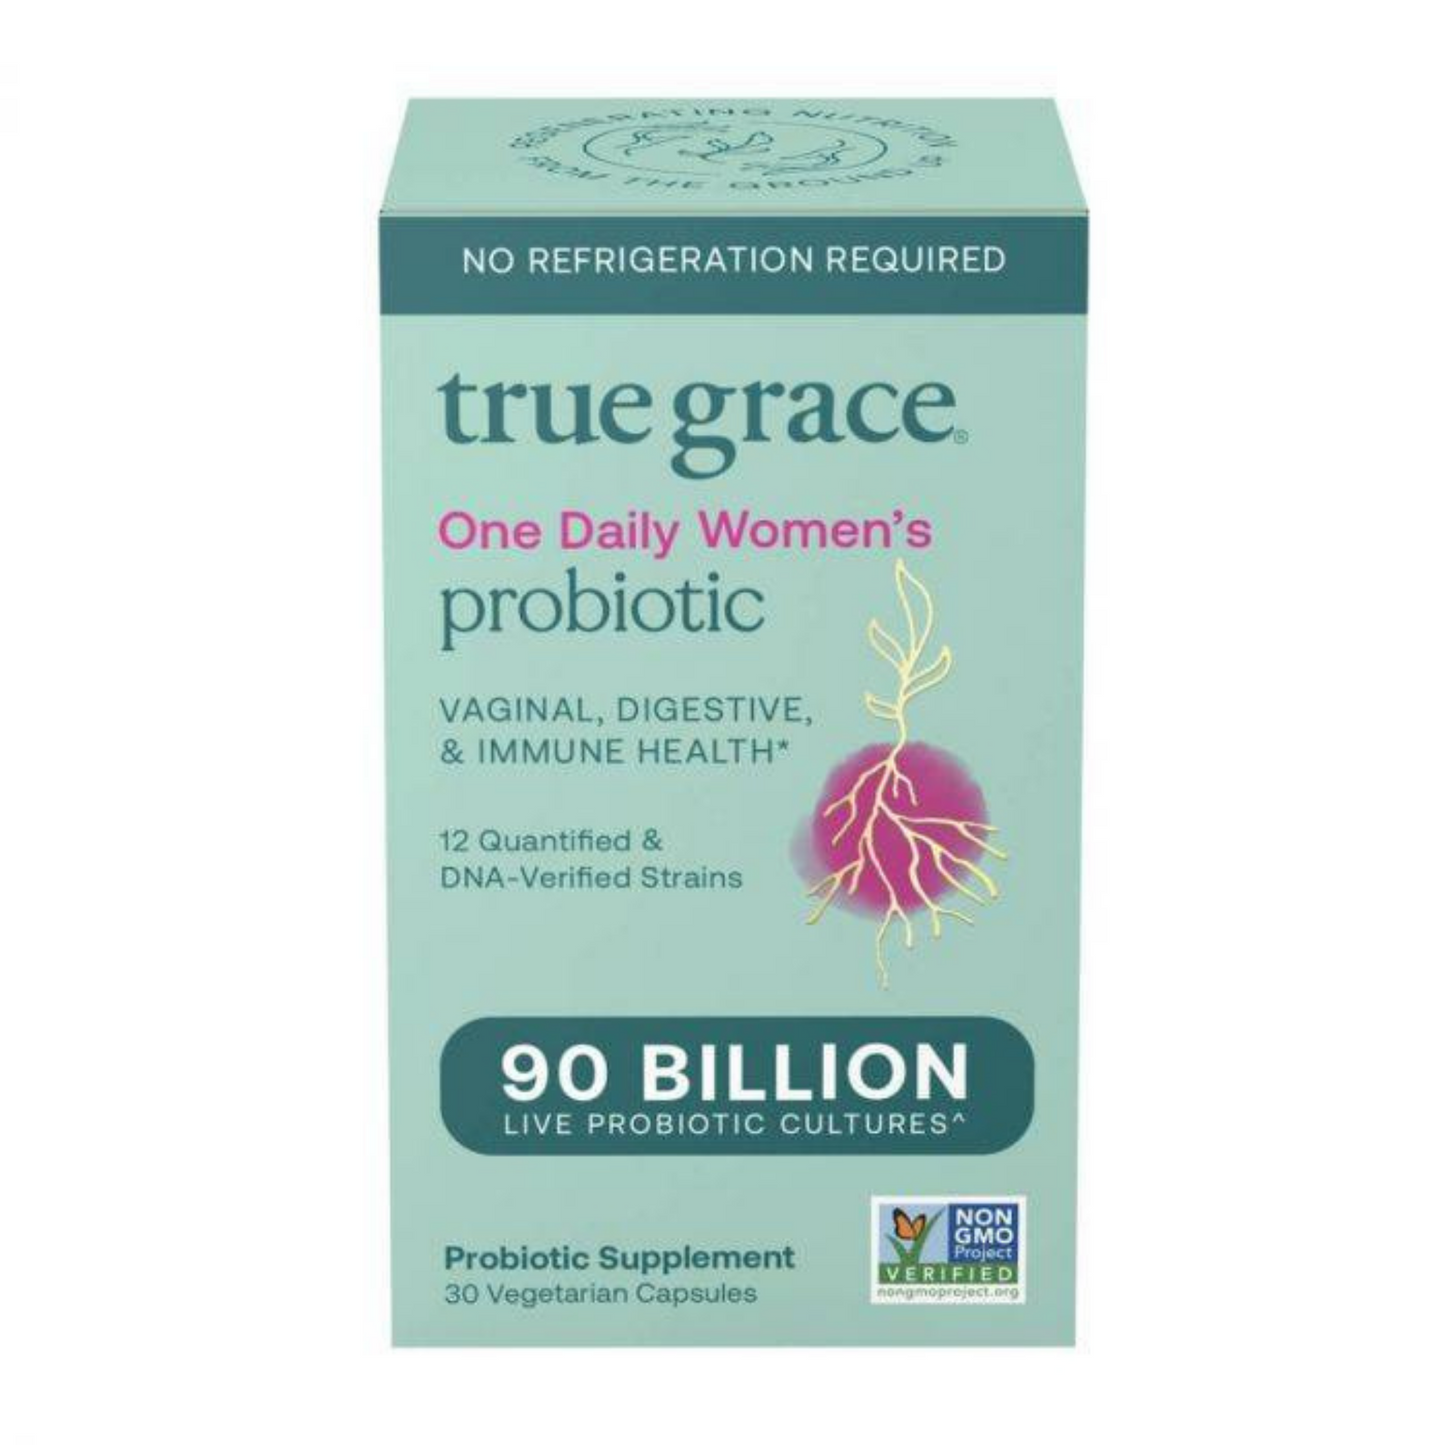 True Grace Women's One Daily Probiotic (30 count) #10084690